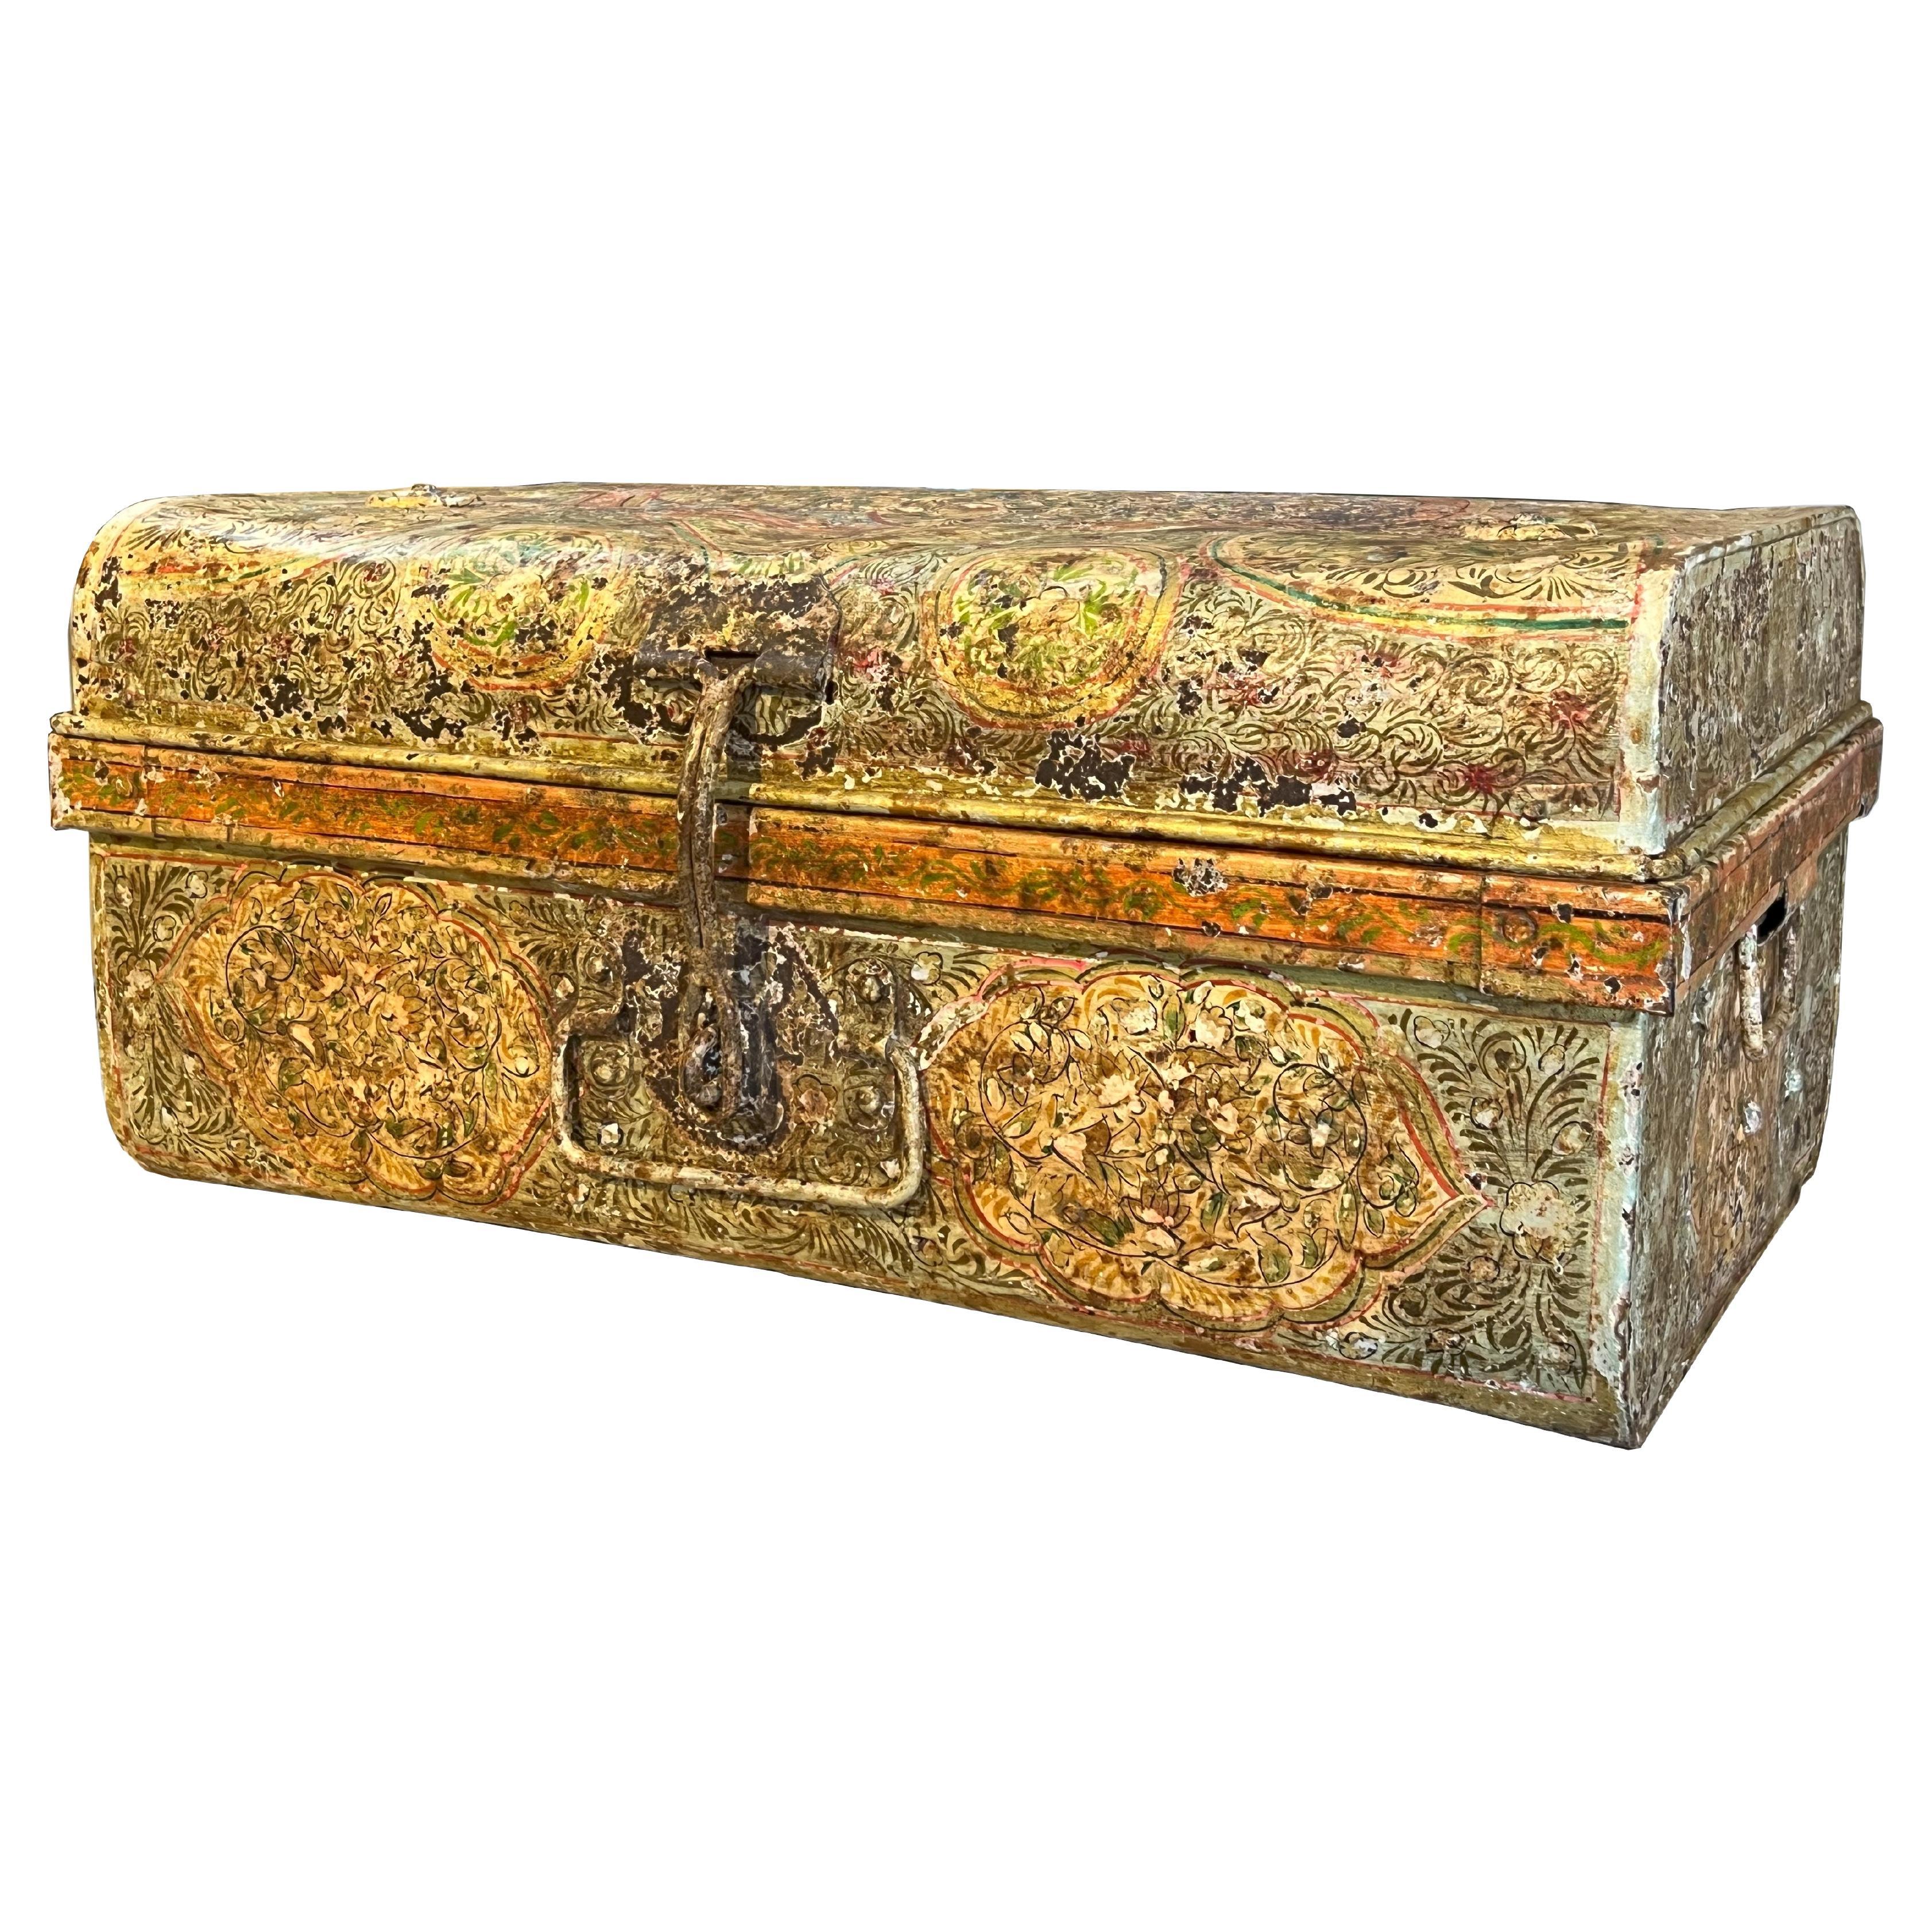 This exquisite piece, with its enchanting blend of rustic charm and vintage allure, is sure to complement a variety of interior styles as an exquisite piece of décor.
The outside features Oriental influence ornate floral patterns in primarily green,